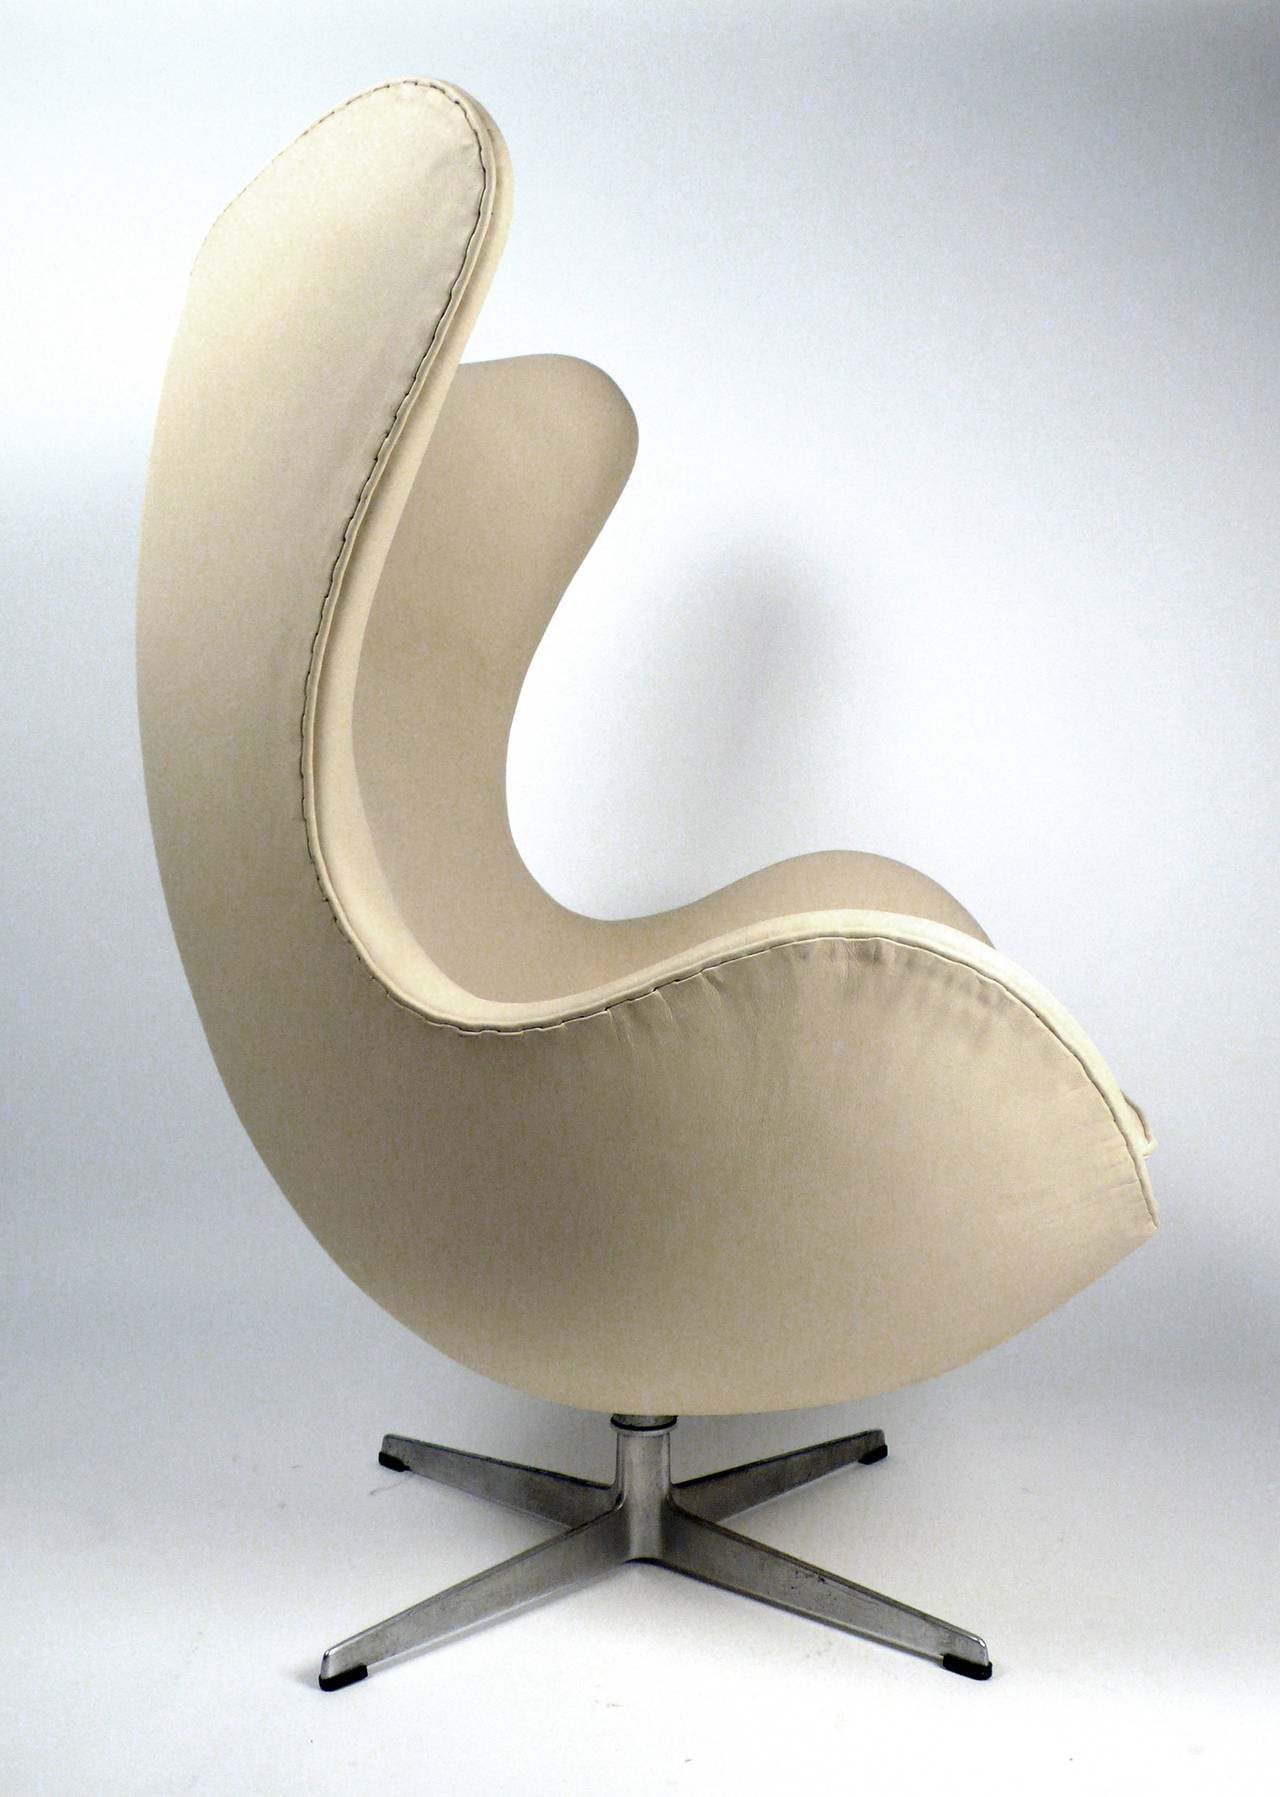 Early Production Leather Egg Chair with Matching Ottoman by Arne Jacobsen 1